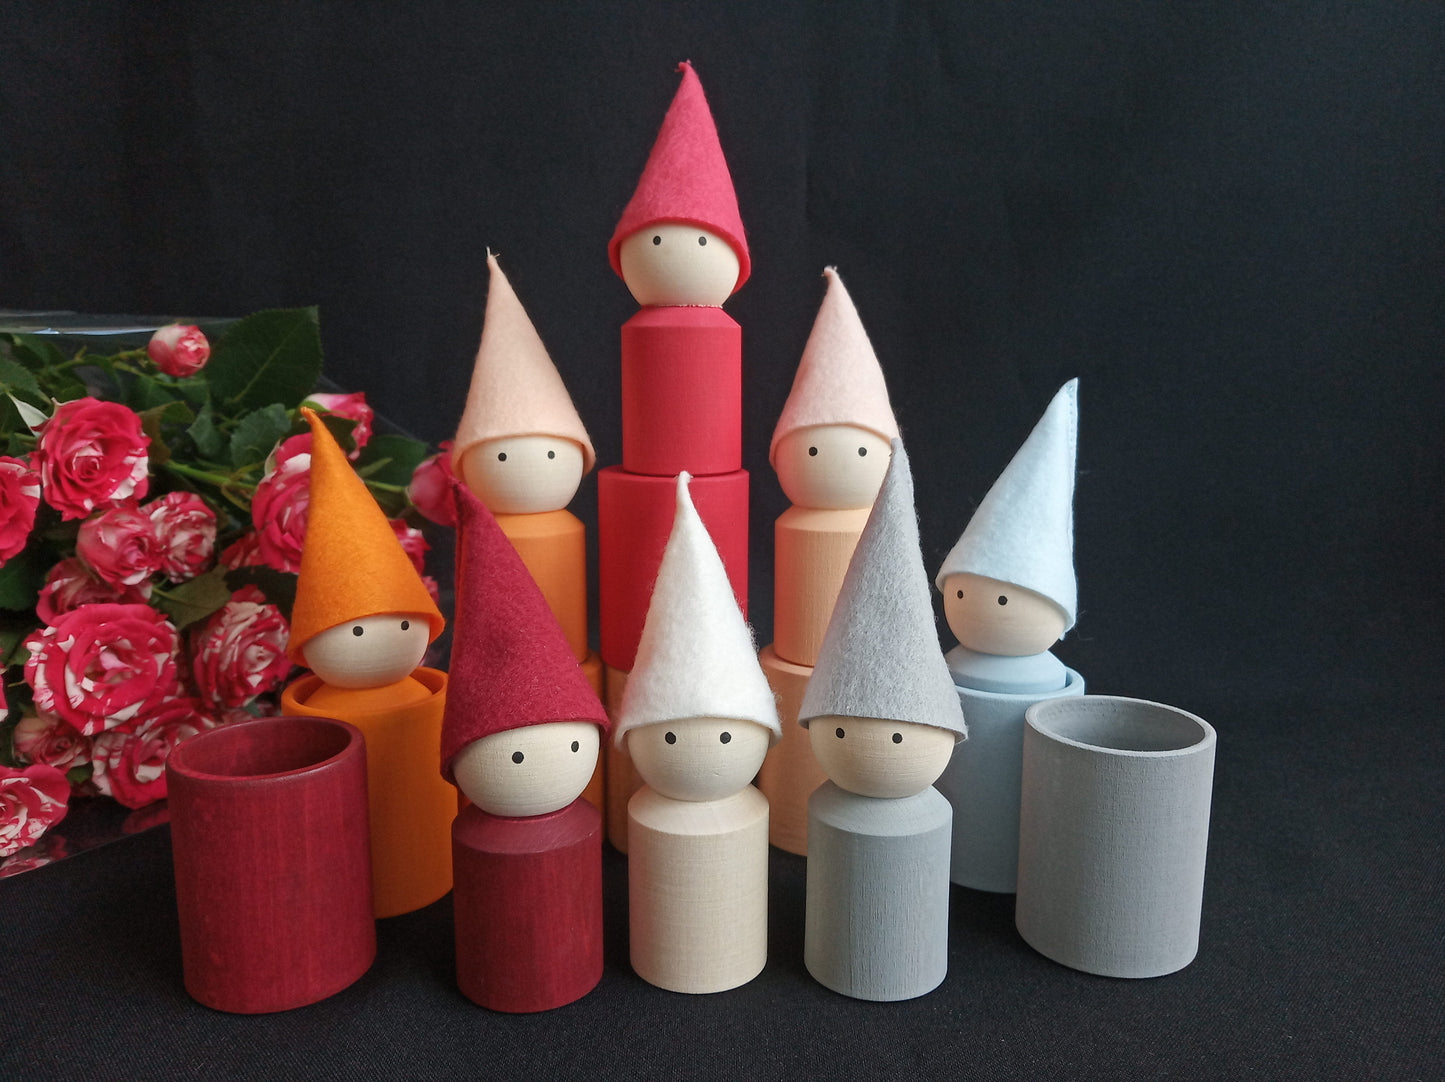 Wooden Peg Dolls and Cups